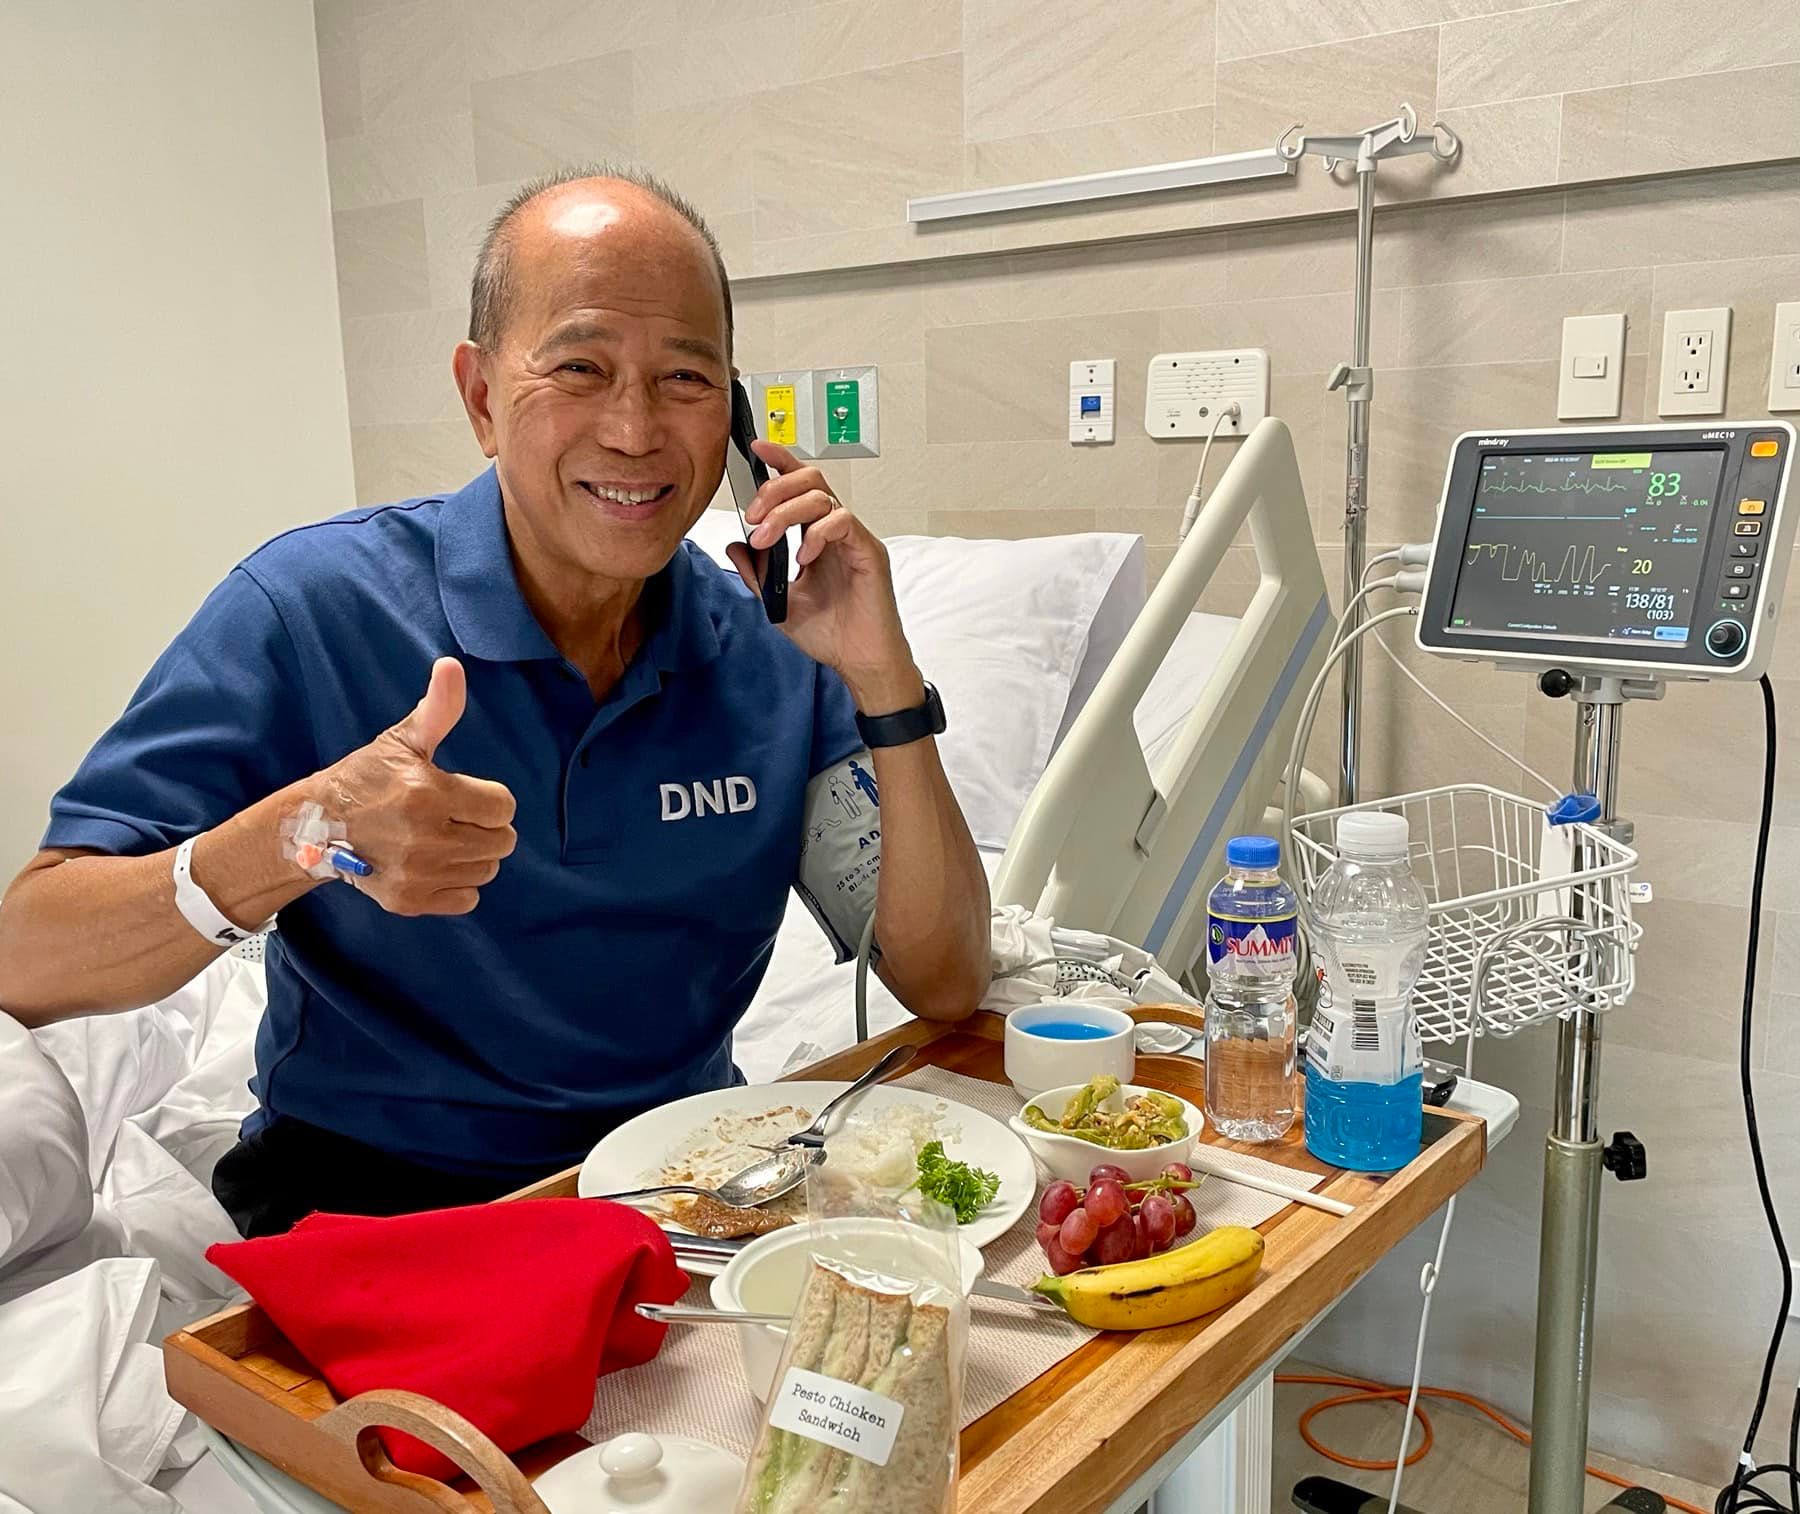 DND Sec Delfin Lorenzana poses while eating breakfast on his hospital bed